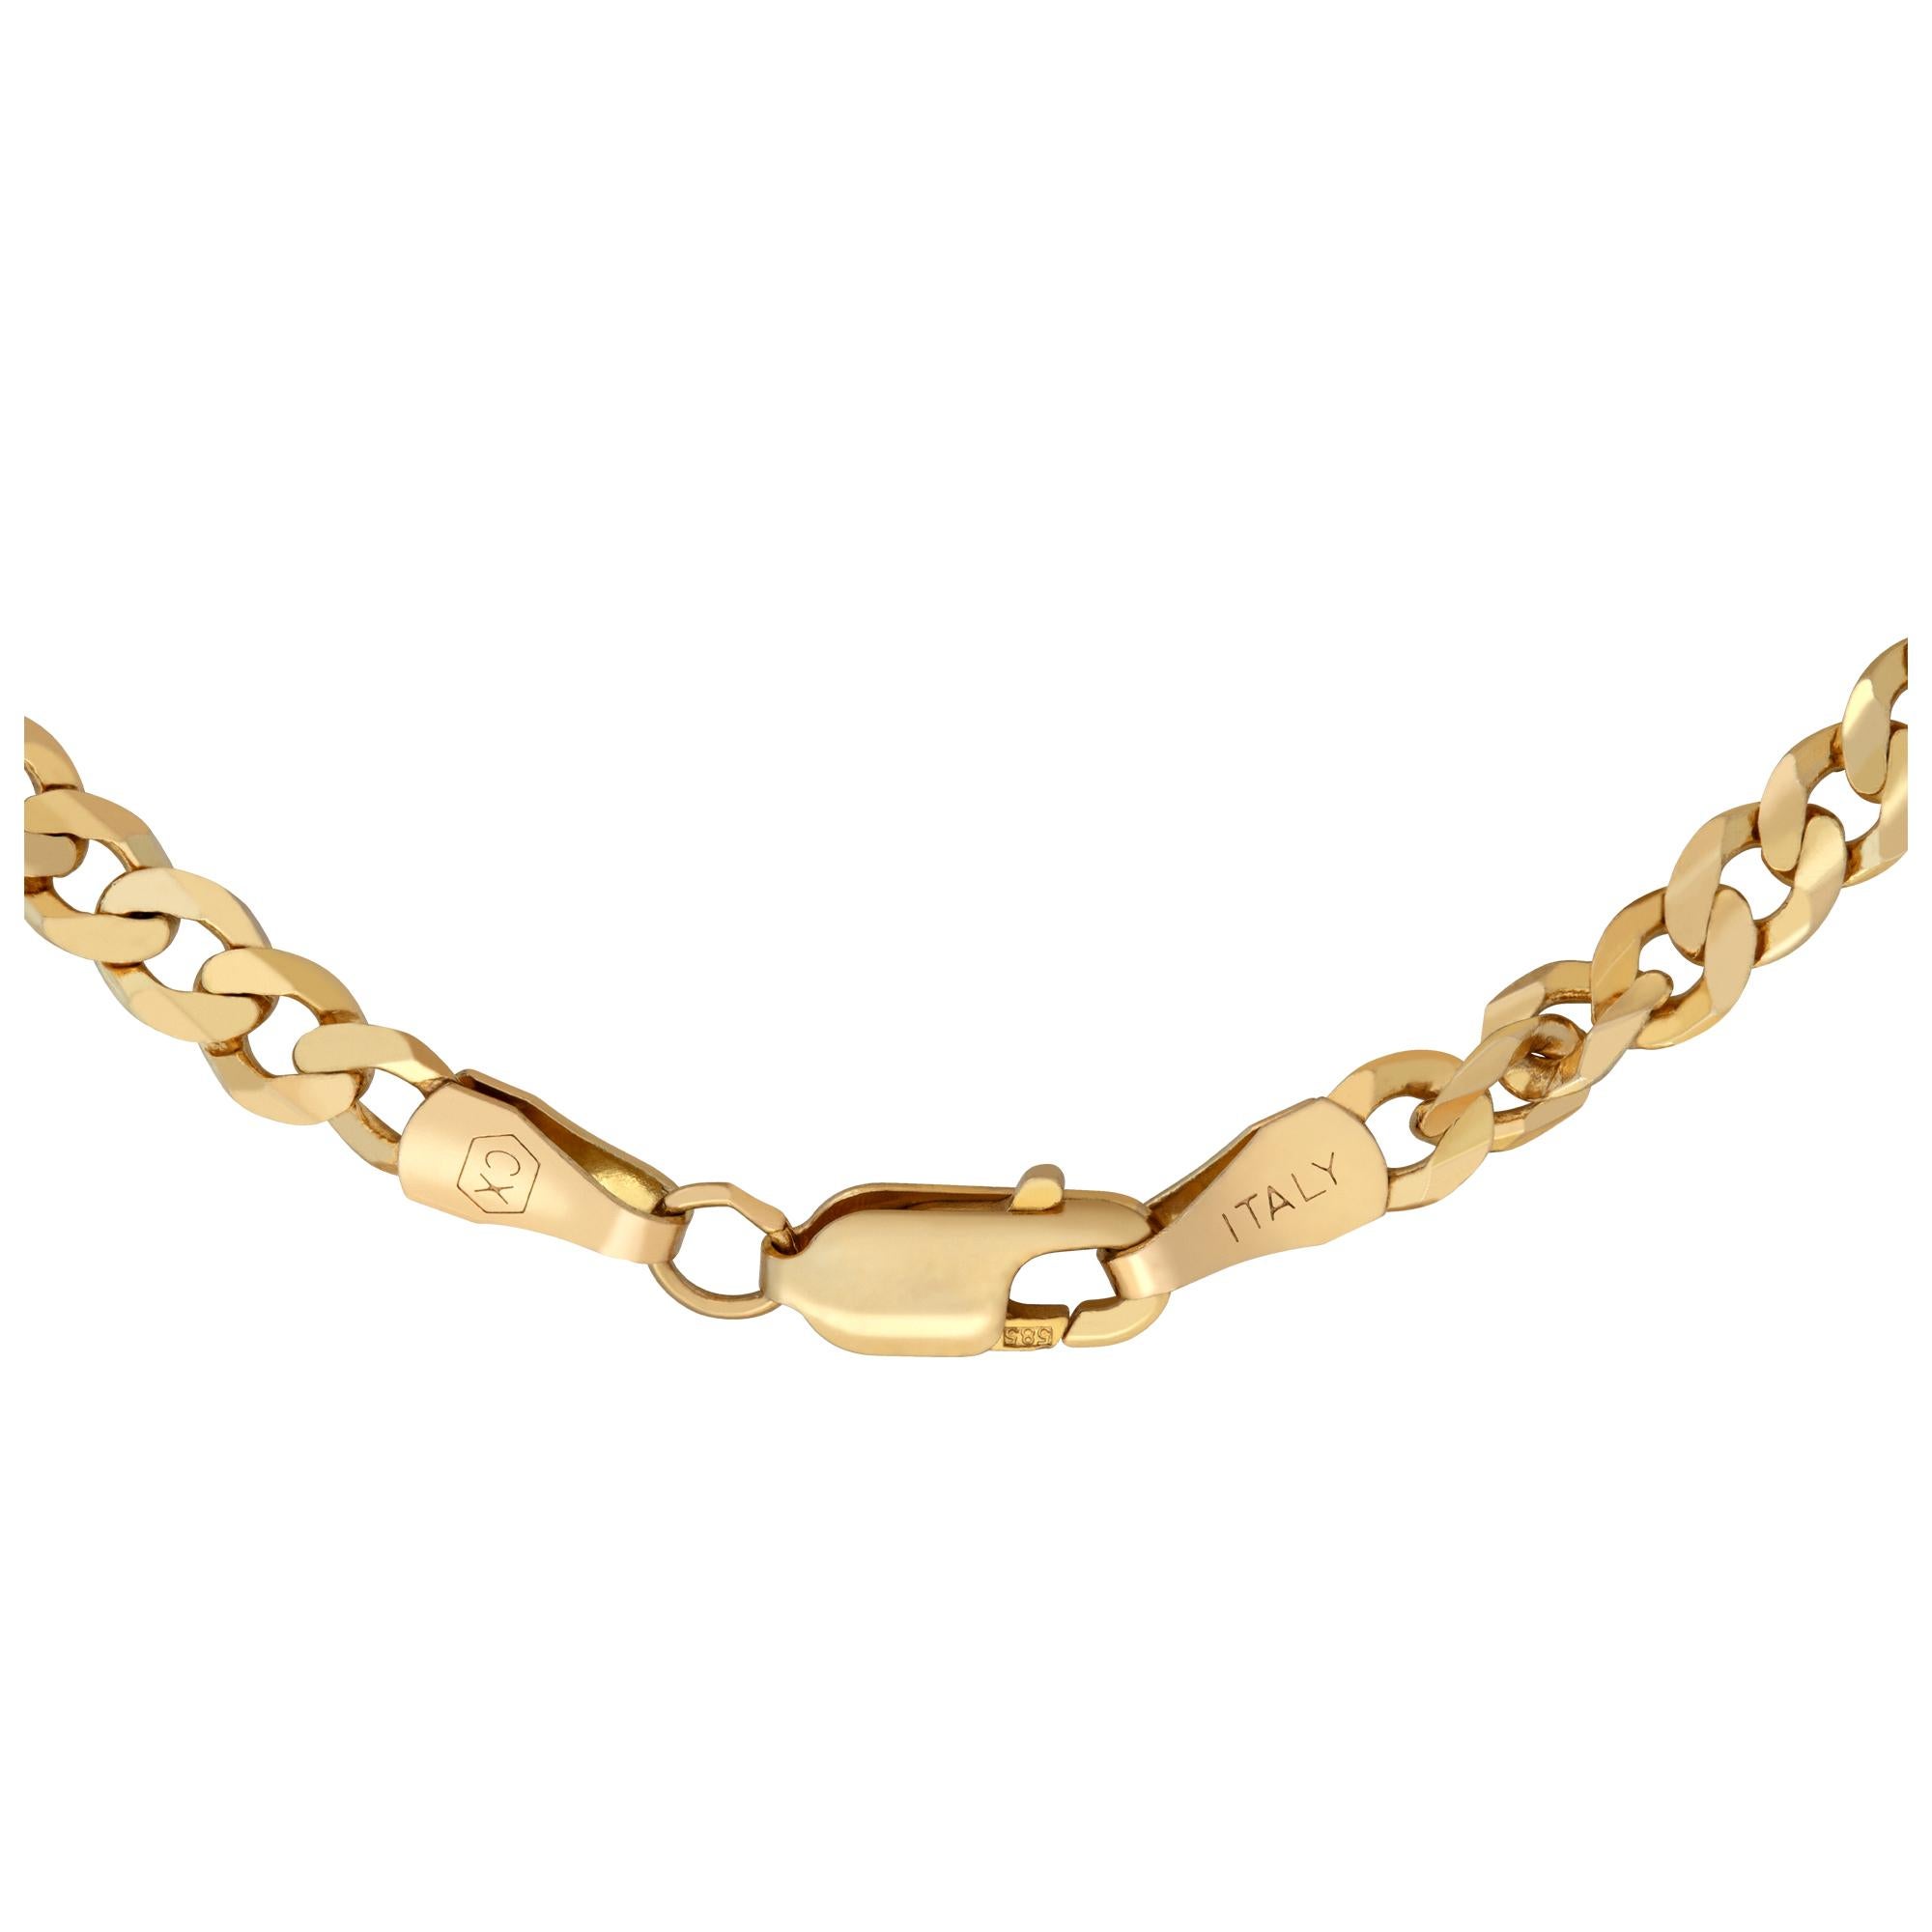 Women's or Men's 14k gold necklace chain